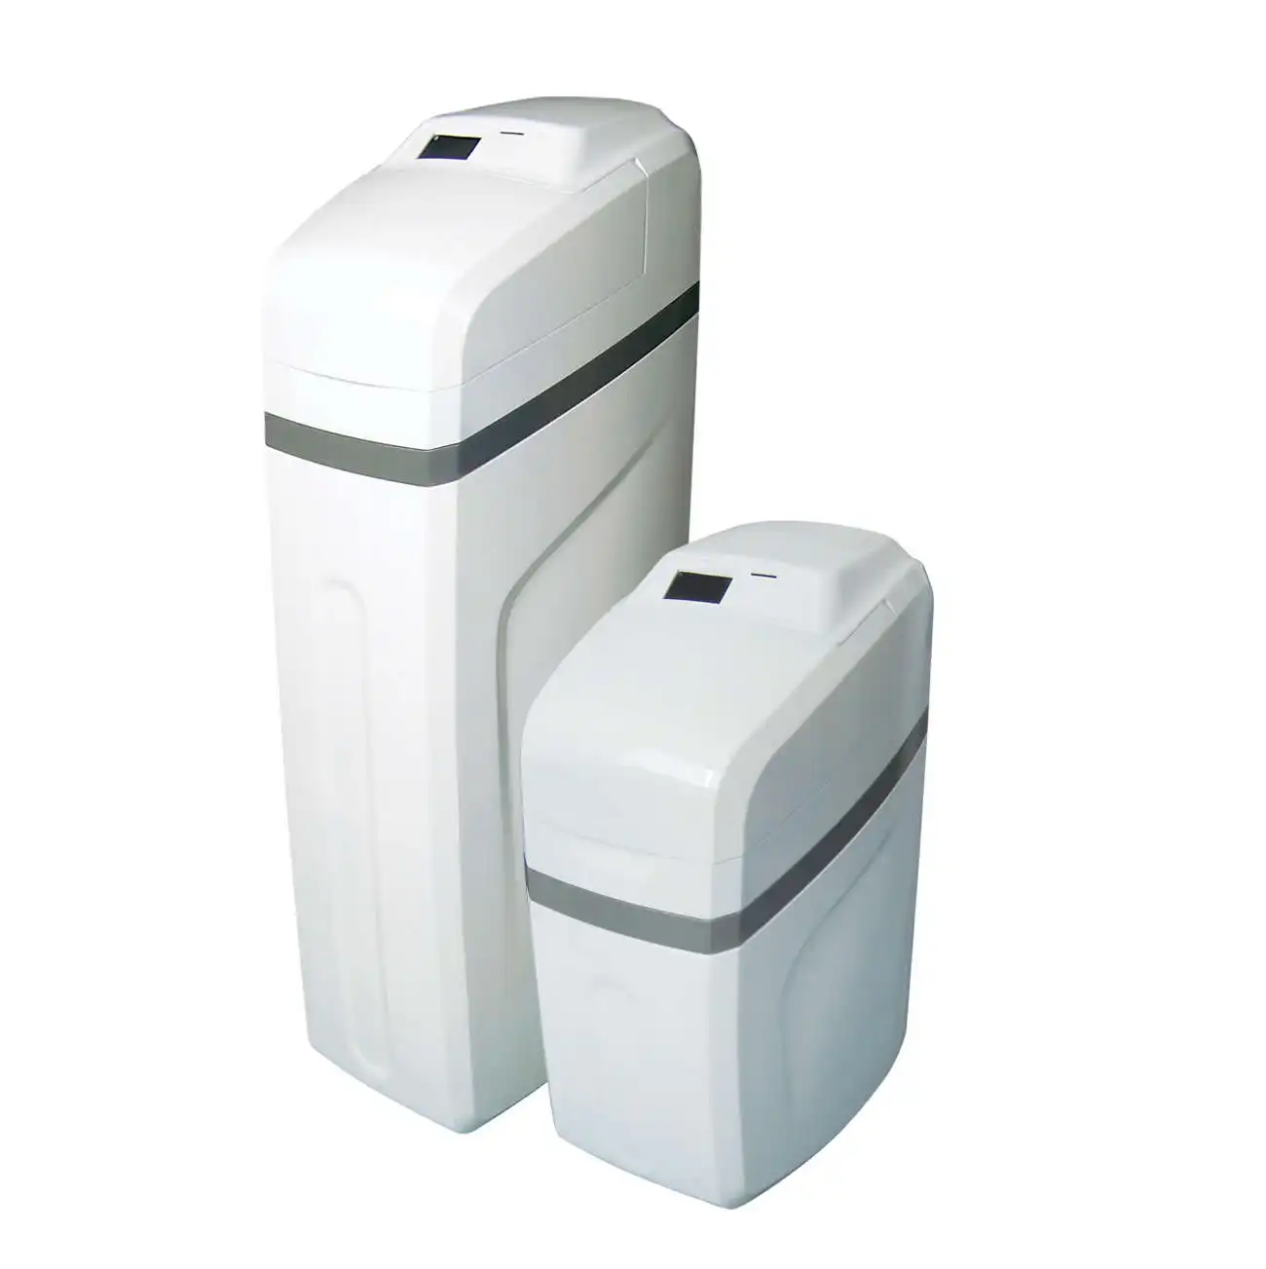 What Is The Difference Between A Water Softener And A Water Purifier